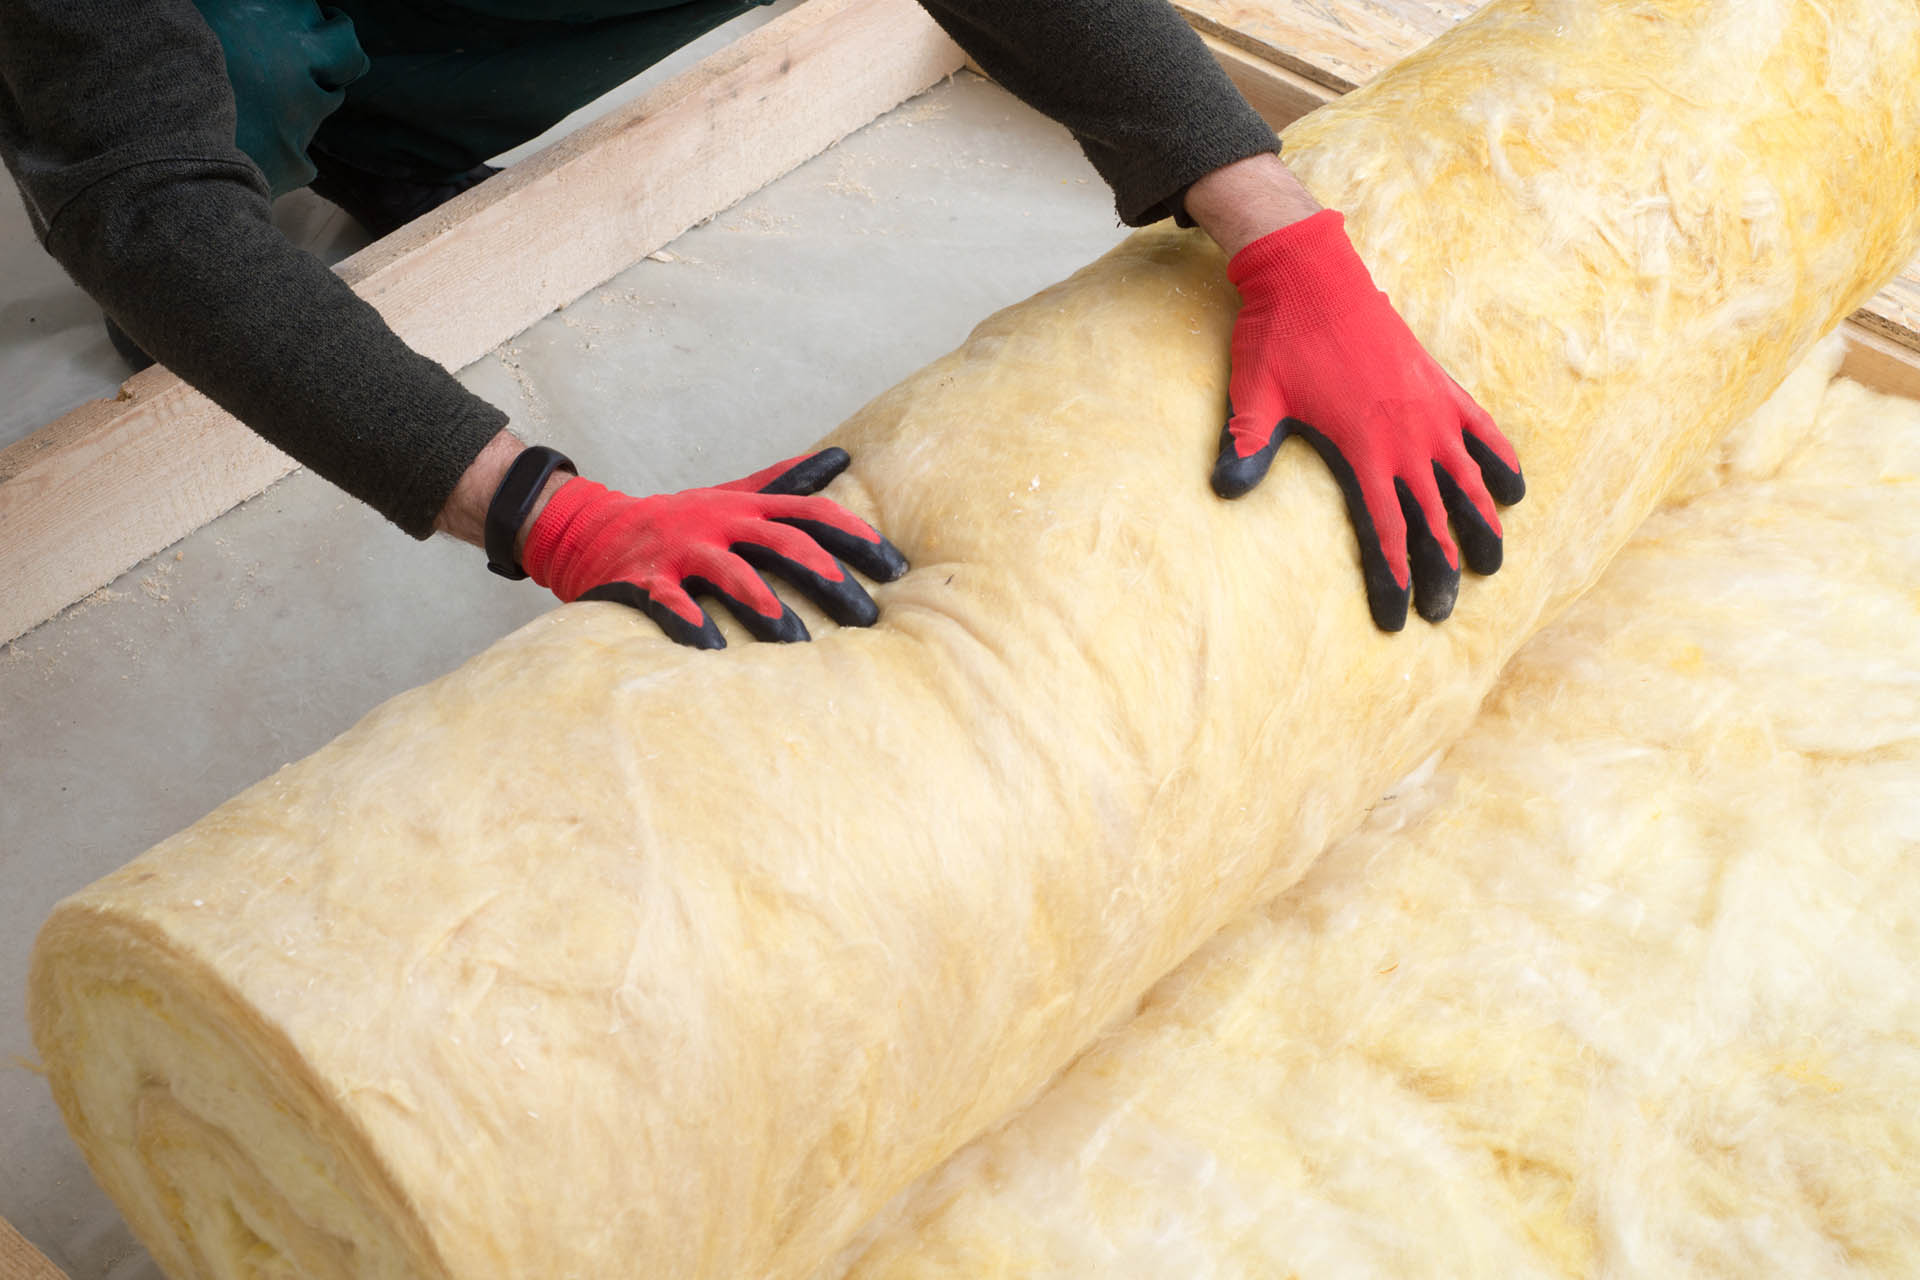 thermal-insulation-wool-rolls-worker-handling-building-materials